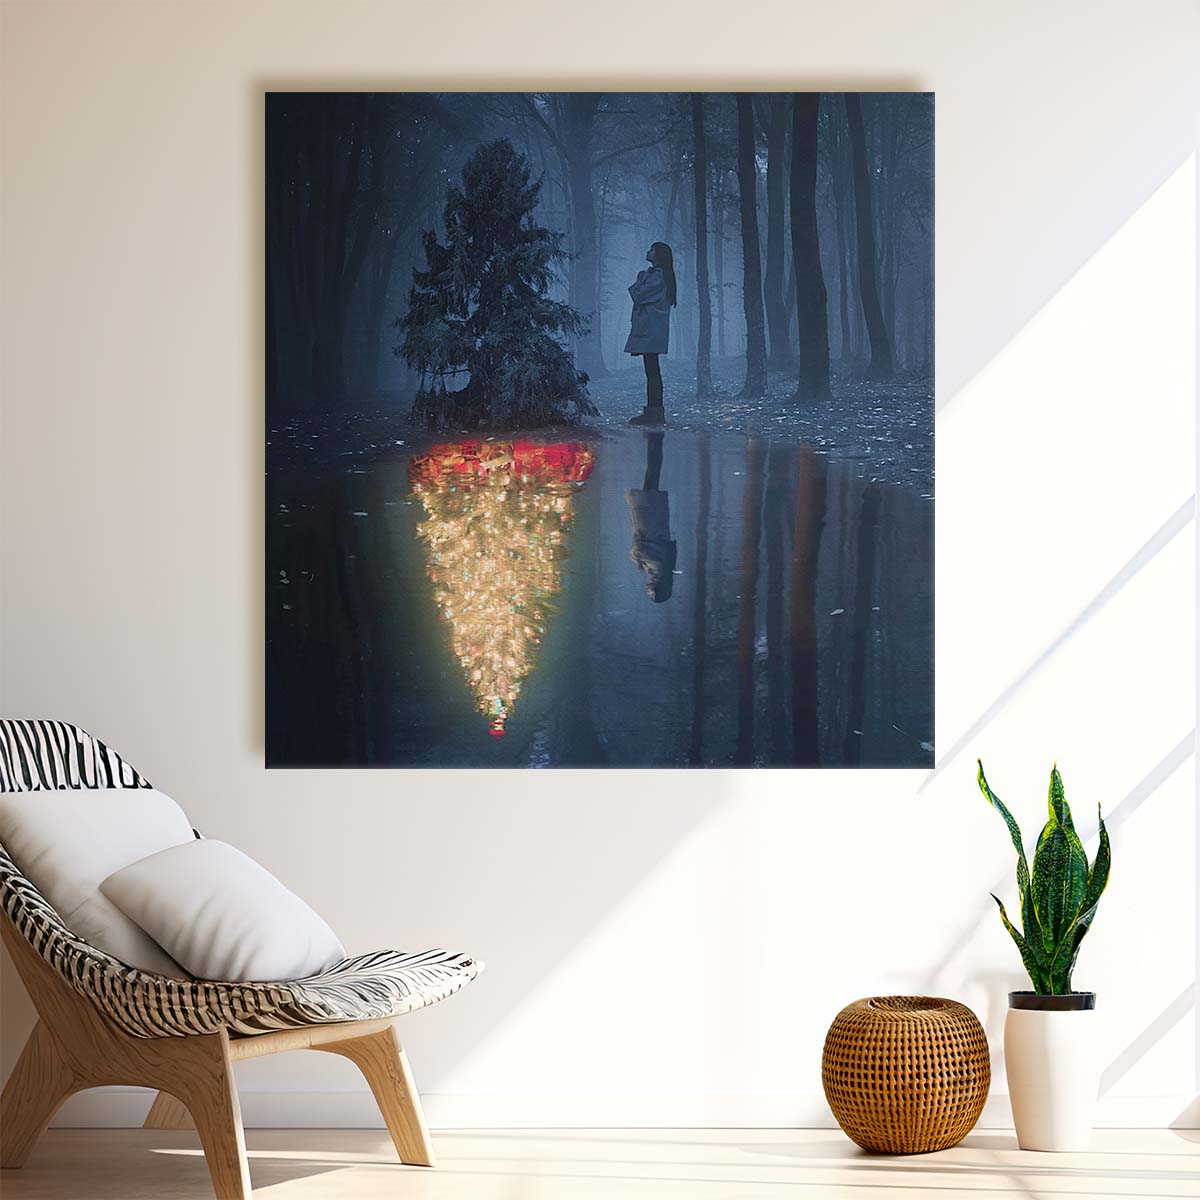 Enchanted Winter Wonderland Snowy Forest Dream Reflection Photography Wall Art by Luxuriance Designs. Made in USA.